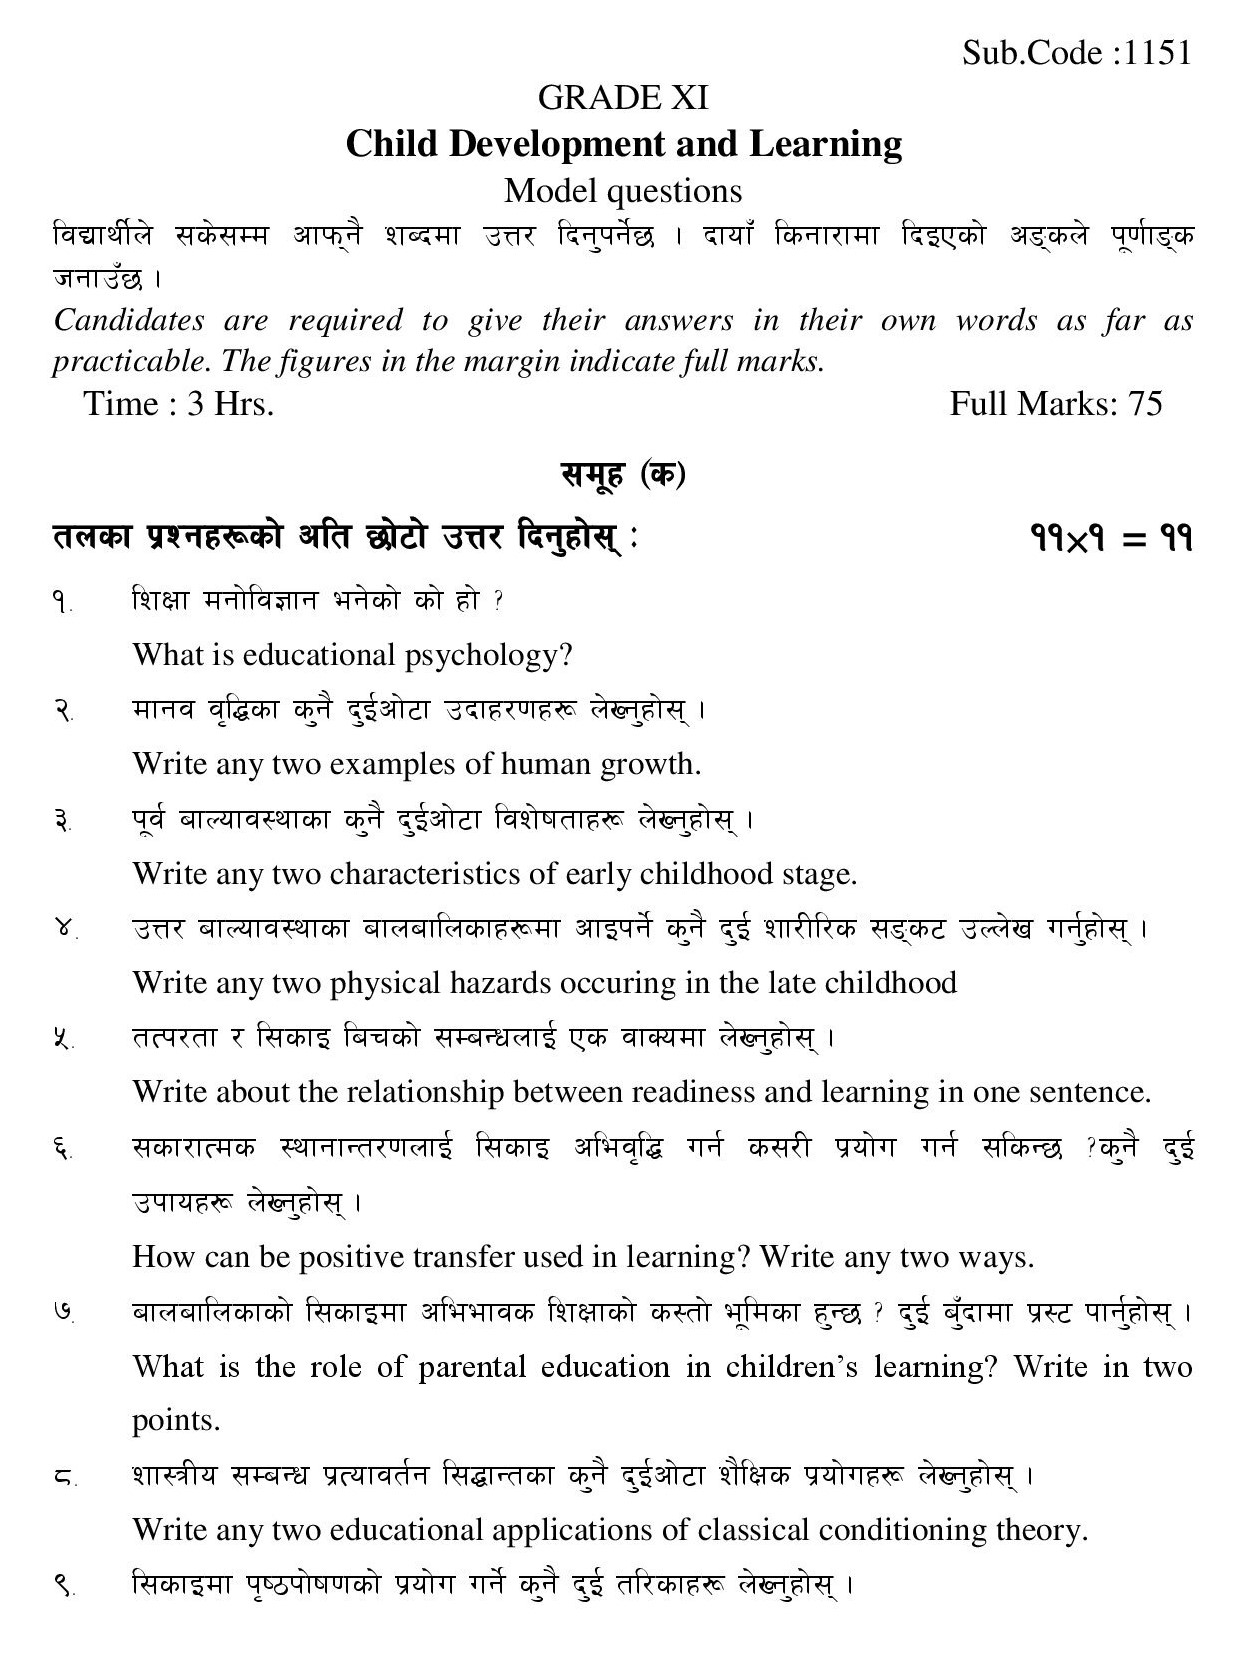 NEB Class 11 Child Development and Learning Model Question 2080 PDF